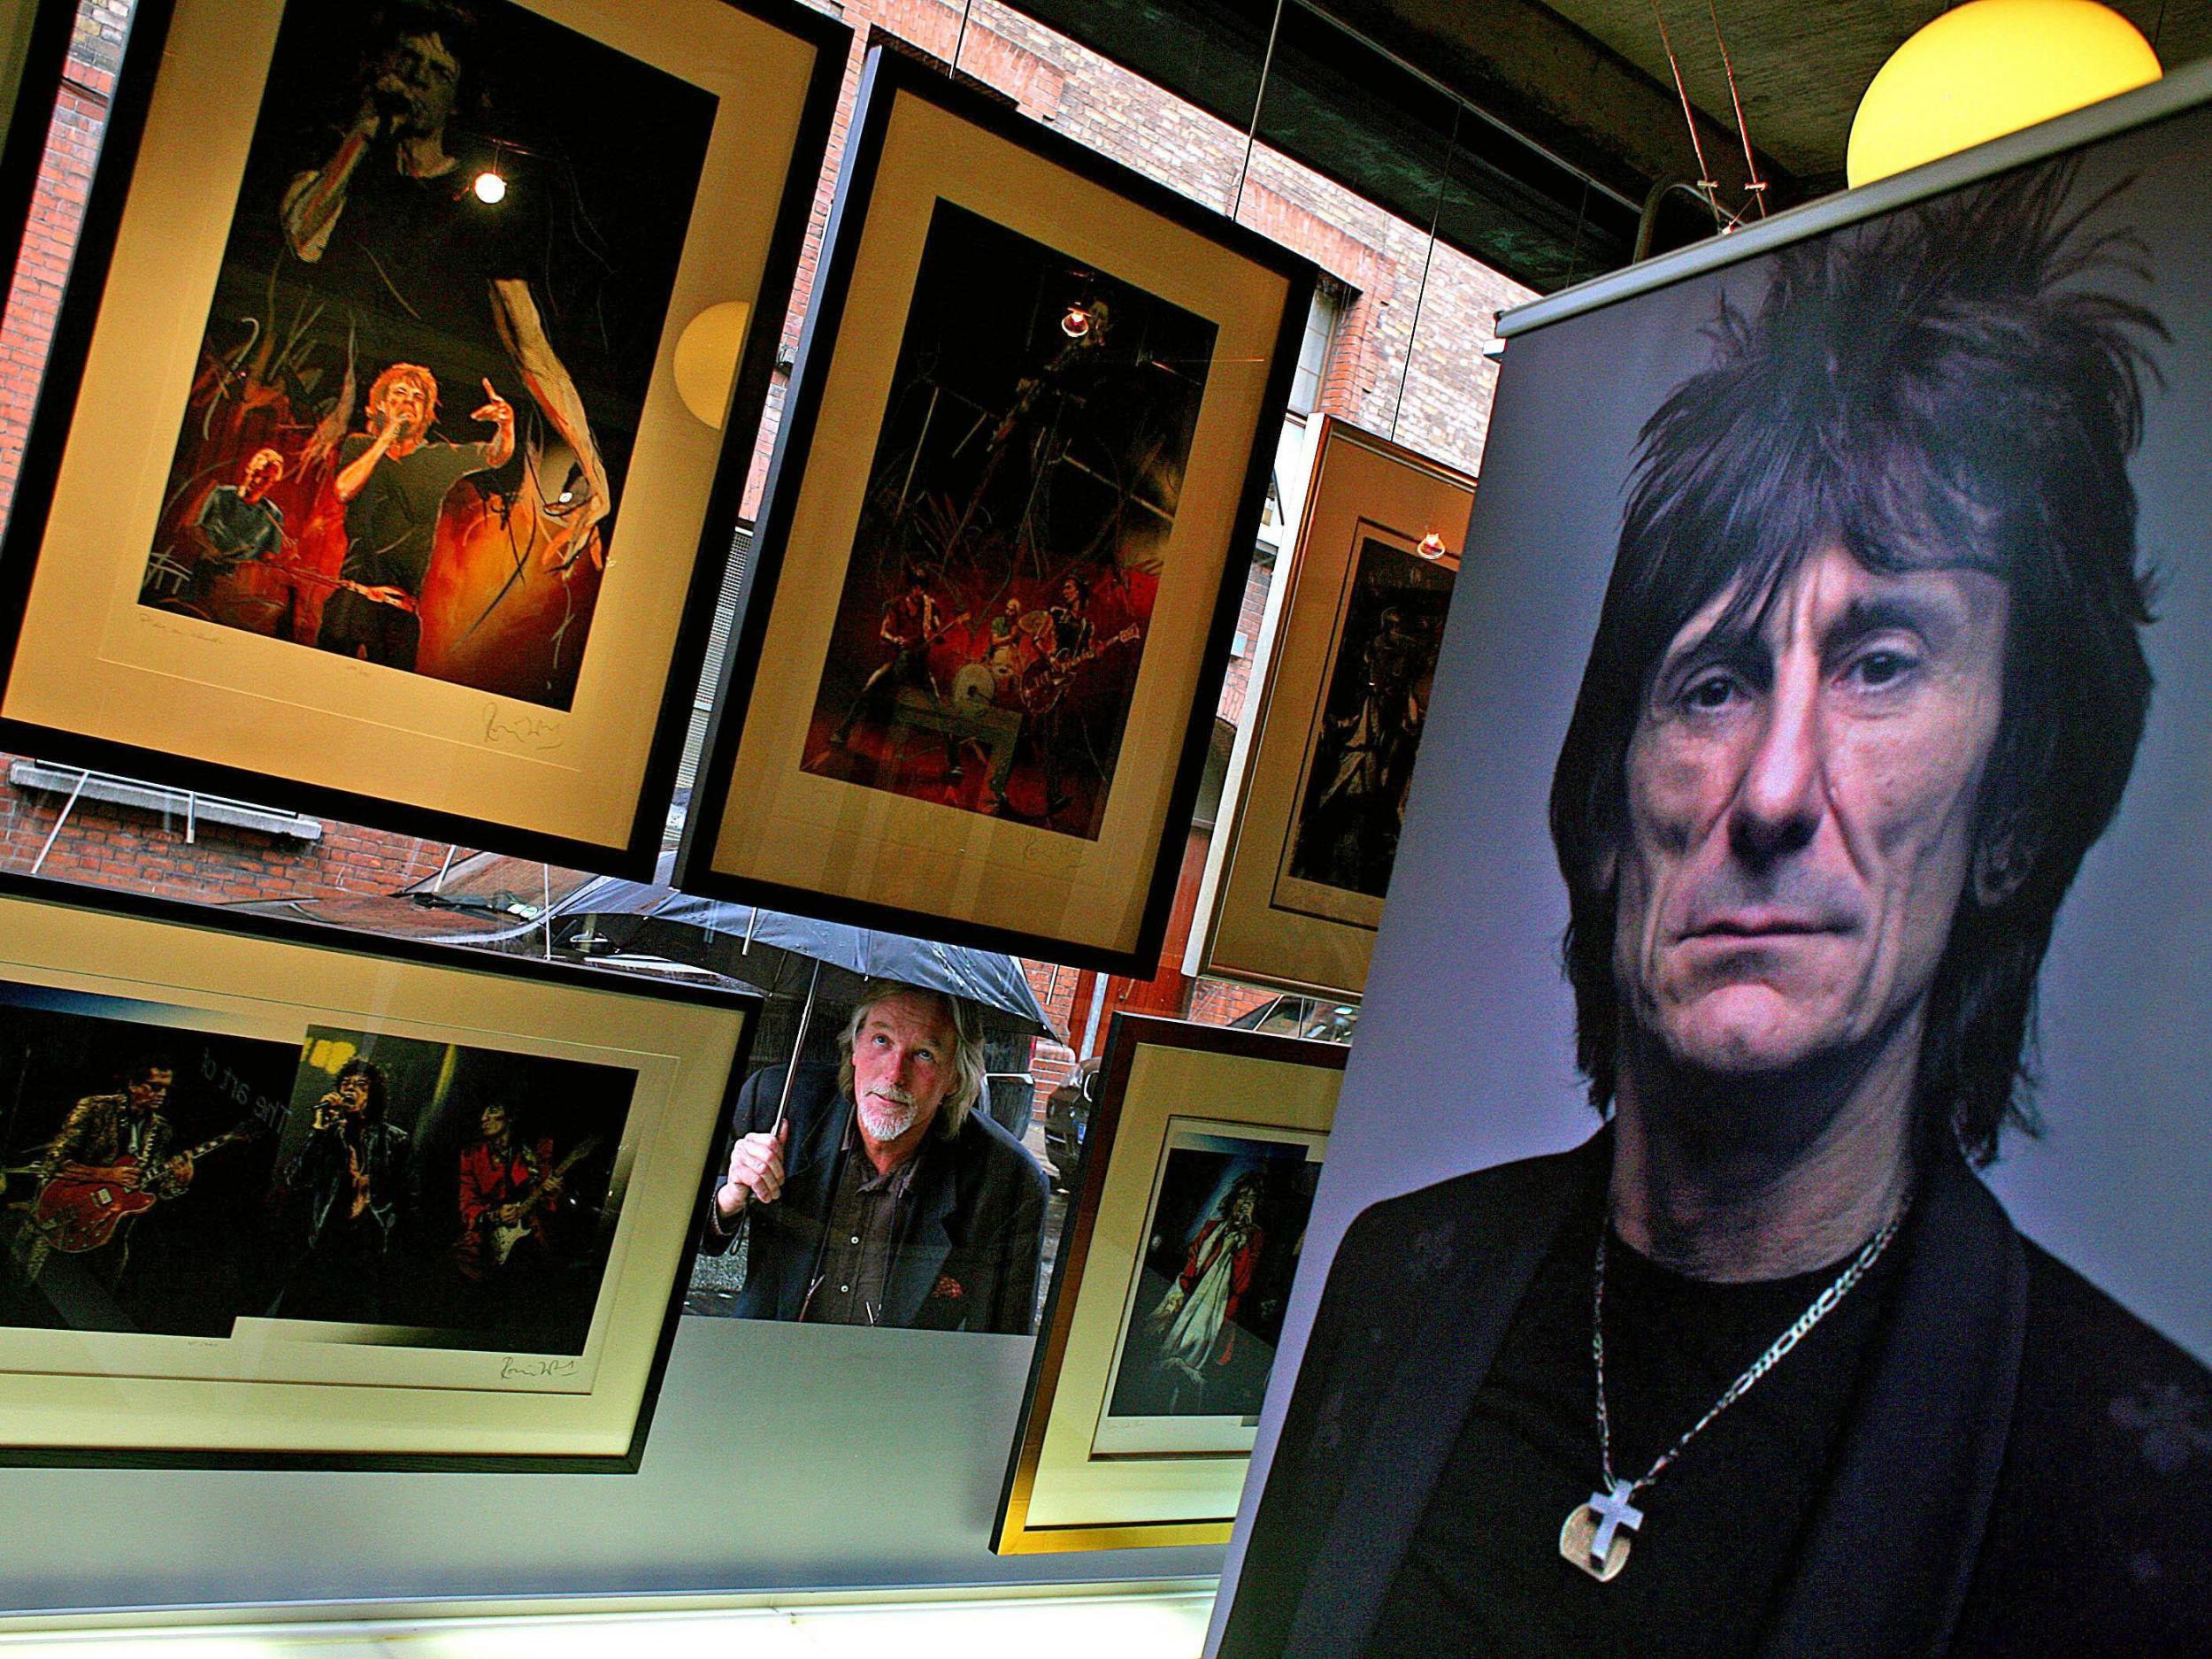 Jonathan Poole at the launch of a Ronnie Wood art exhibition at Dublin's Number One gallery in 2008